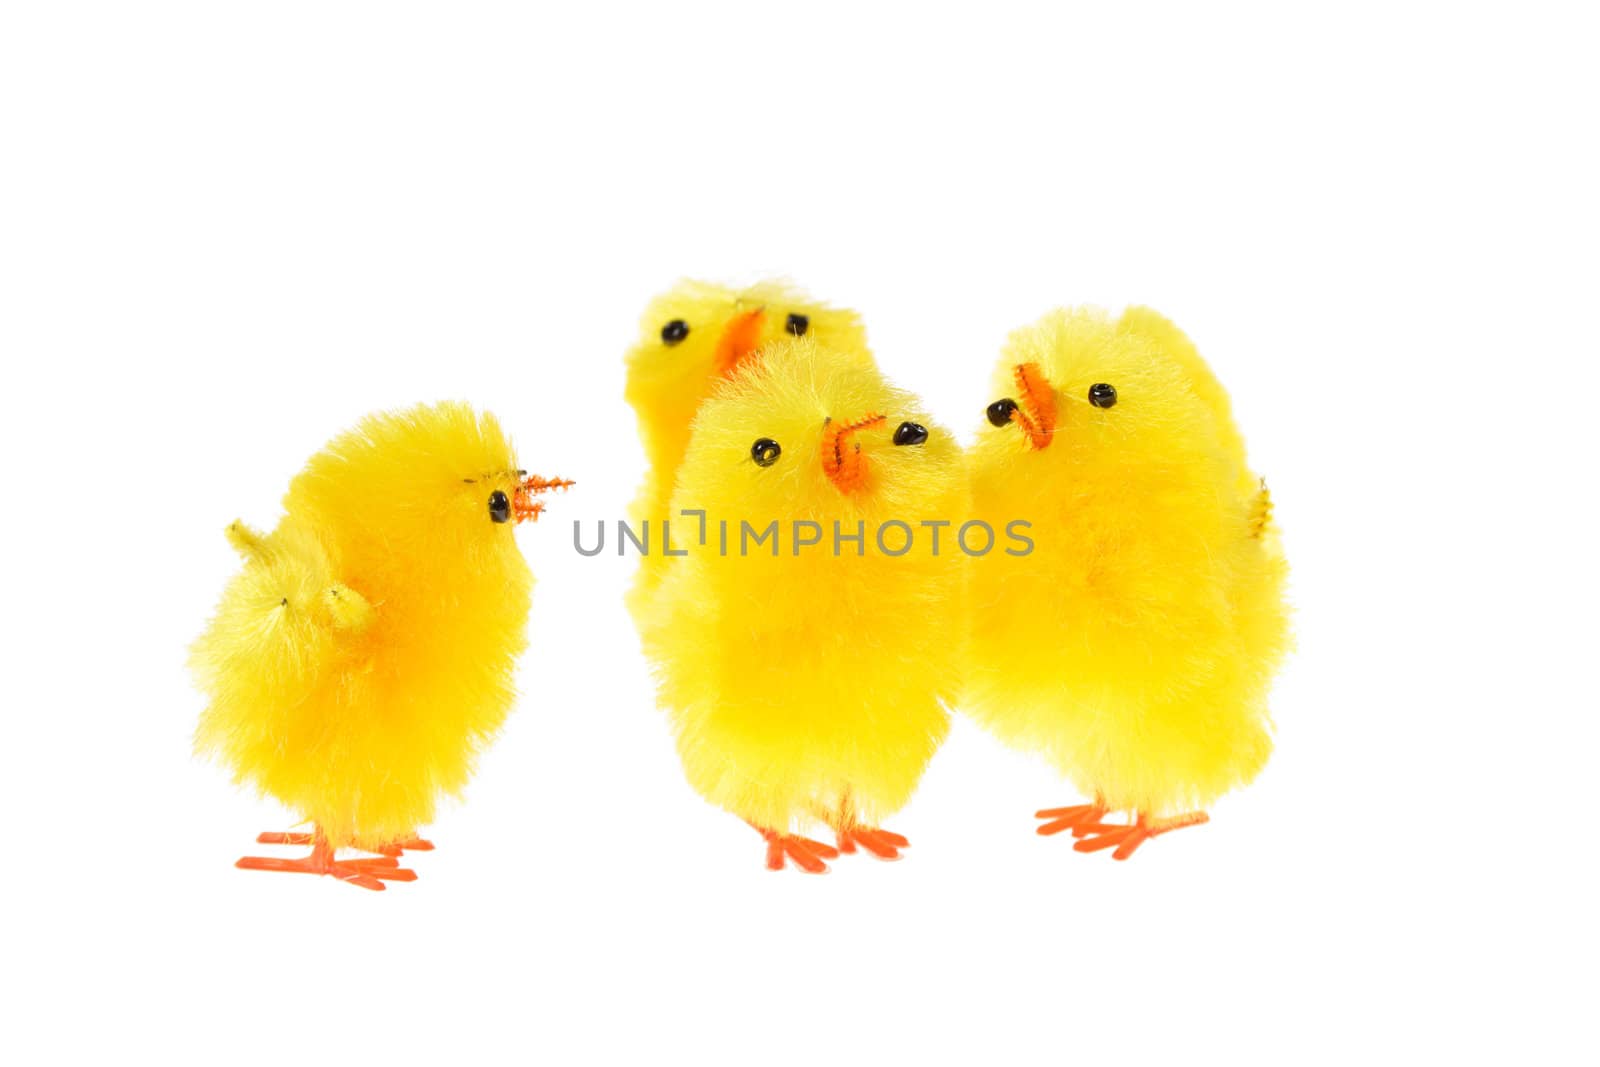 yellow chicklings by aguirre_mar